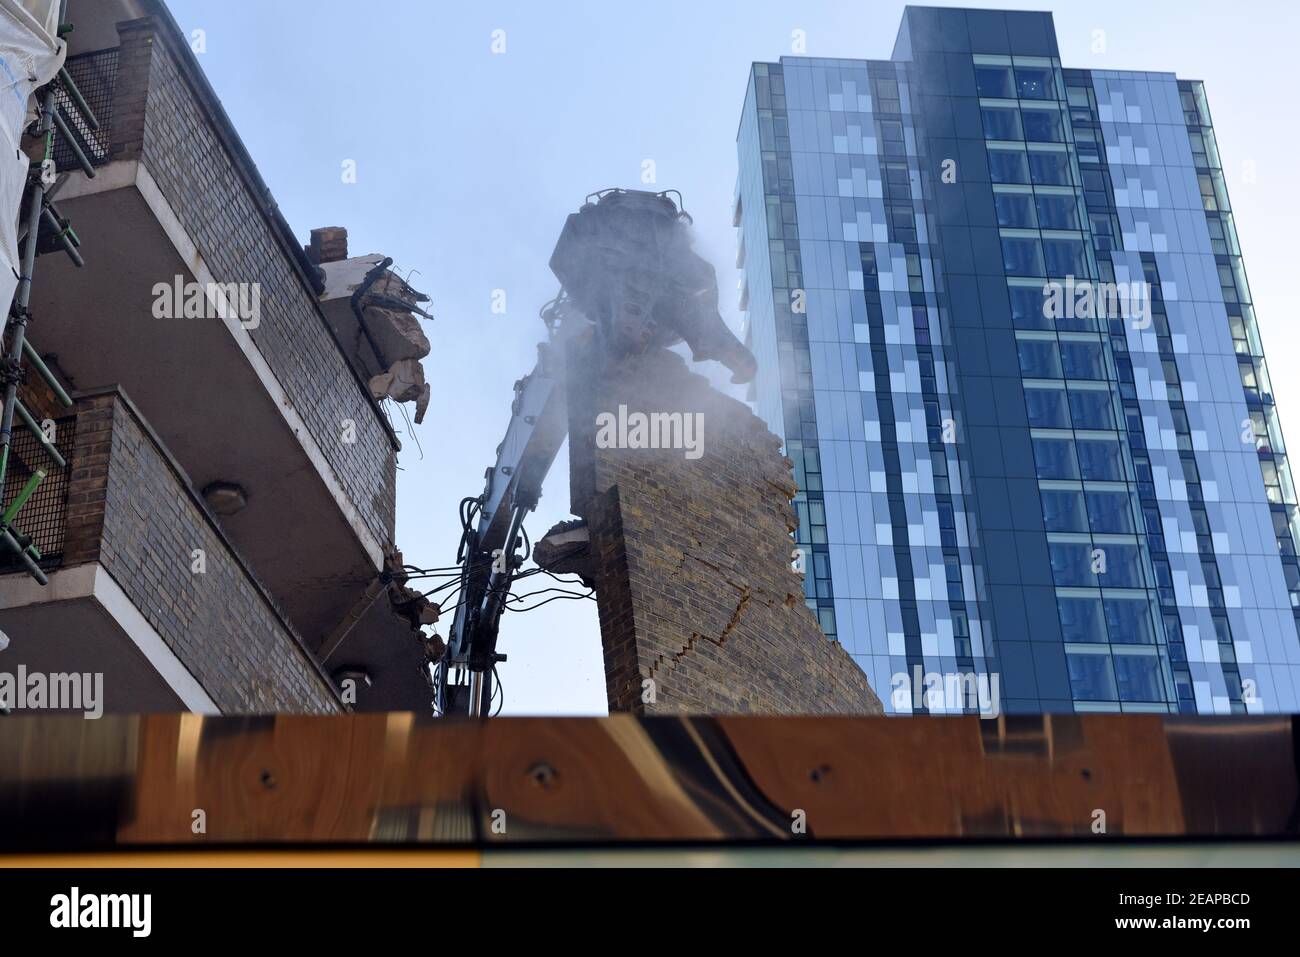 Urban regeneration. A Volvo EC380EHR high reach excavator is used to demolish brick built apartment buildings. Making way for high rise glass towers. Stock Photo